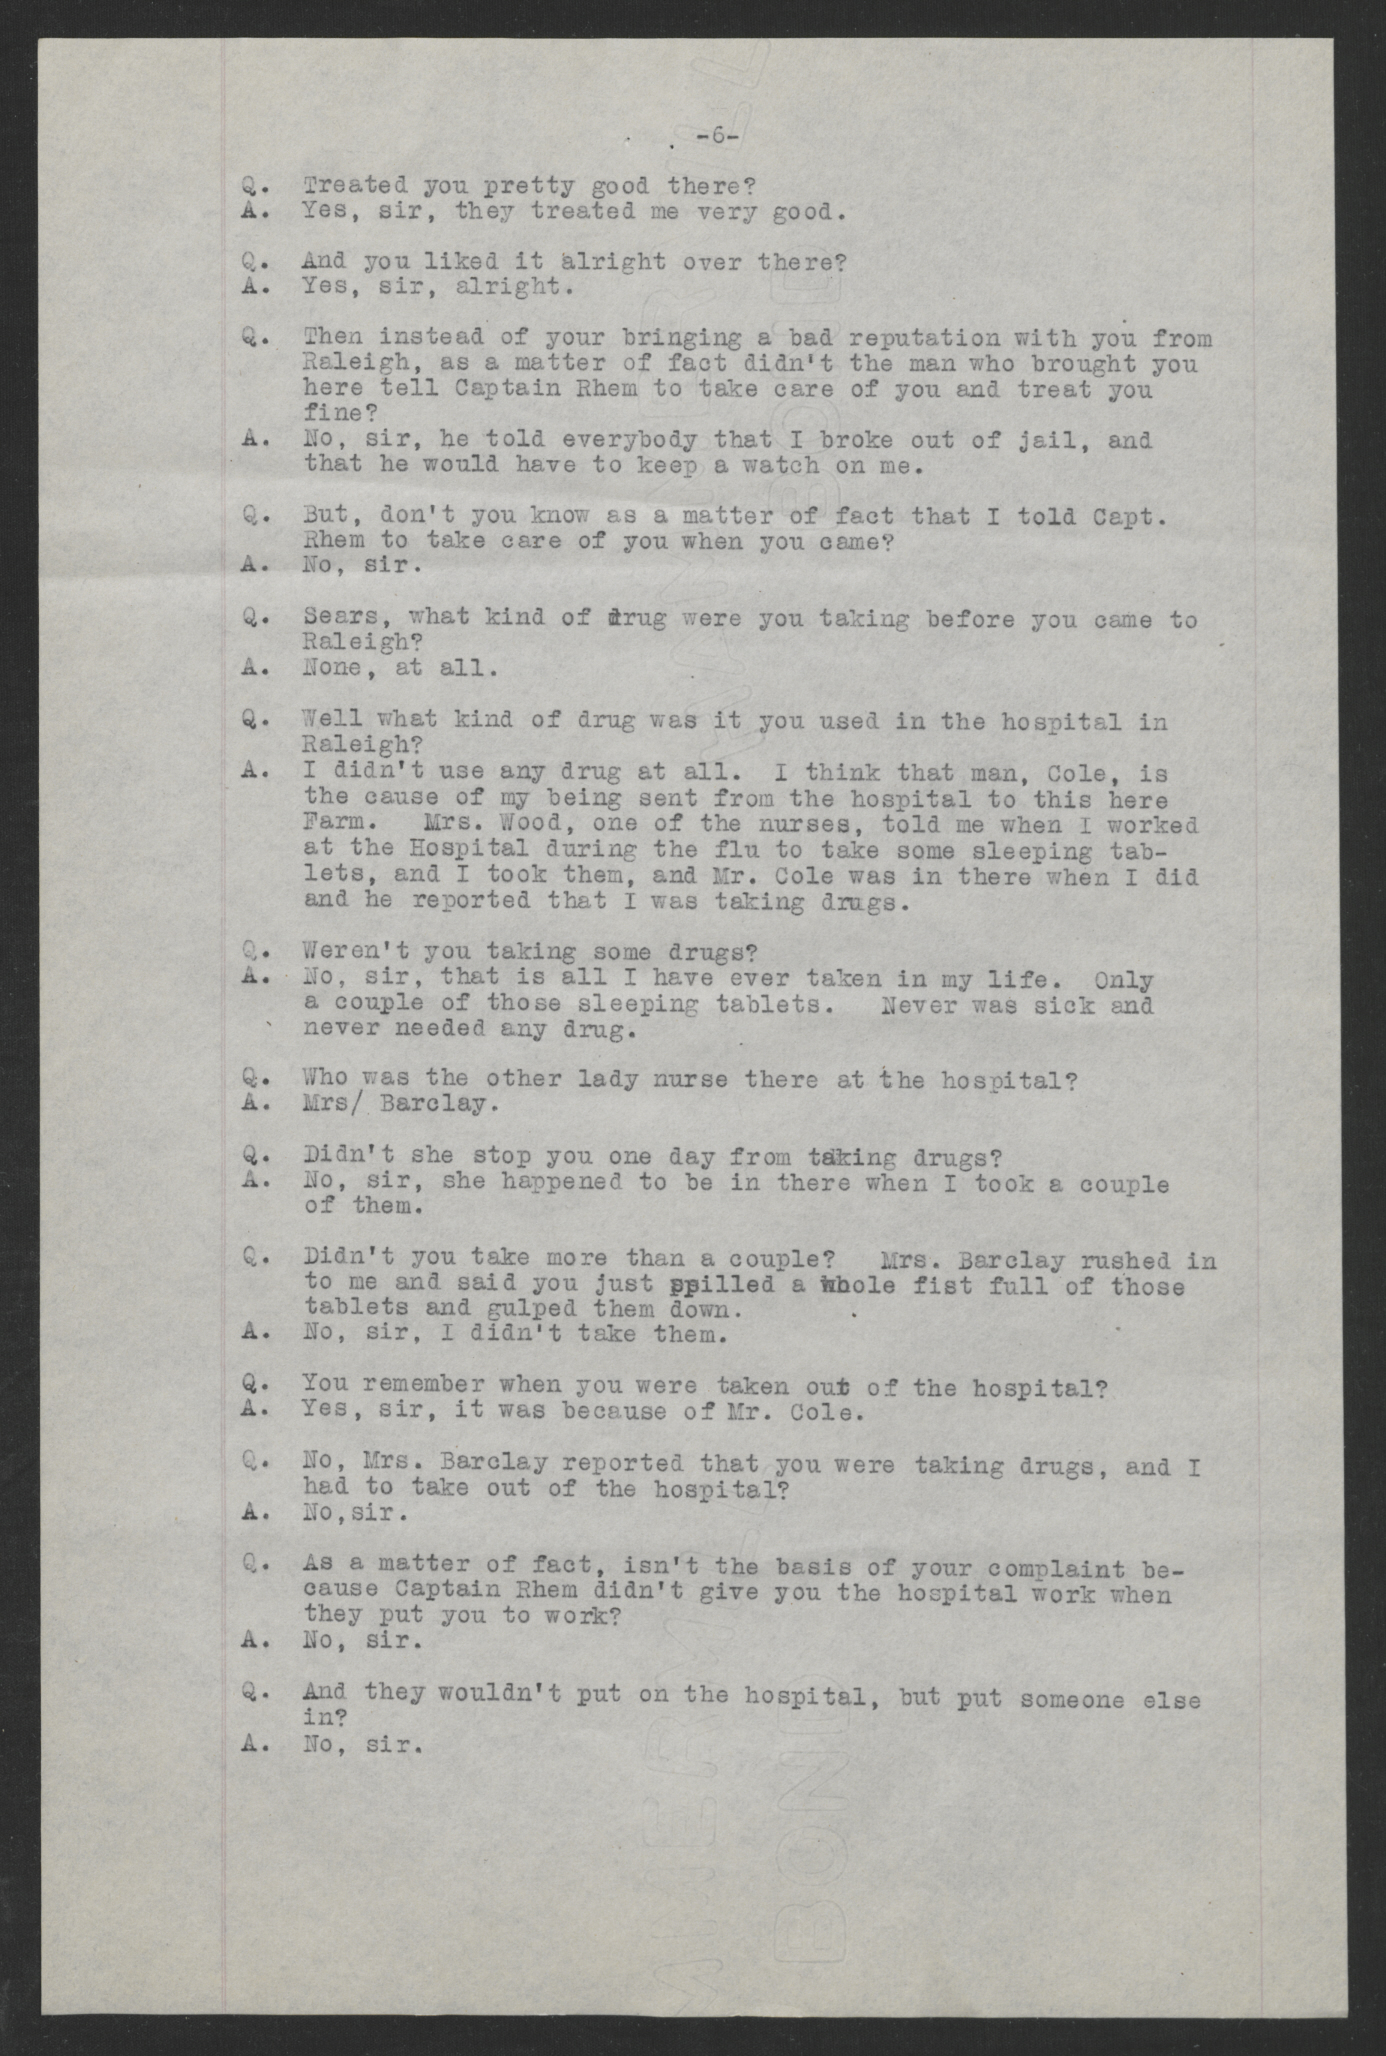 Investigation of the Charges Made by Inmates of the State Prison Farm to Earl E. Dudding, 12 May 1919, page 6